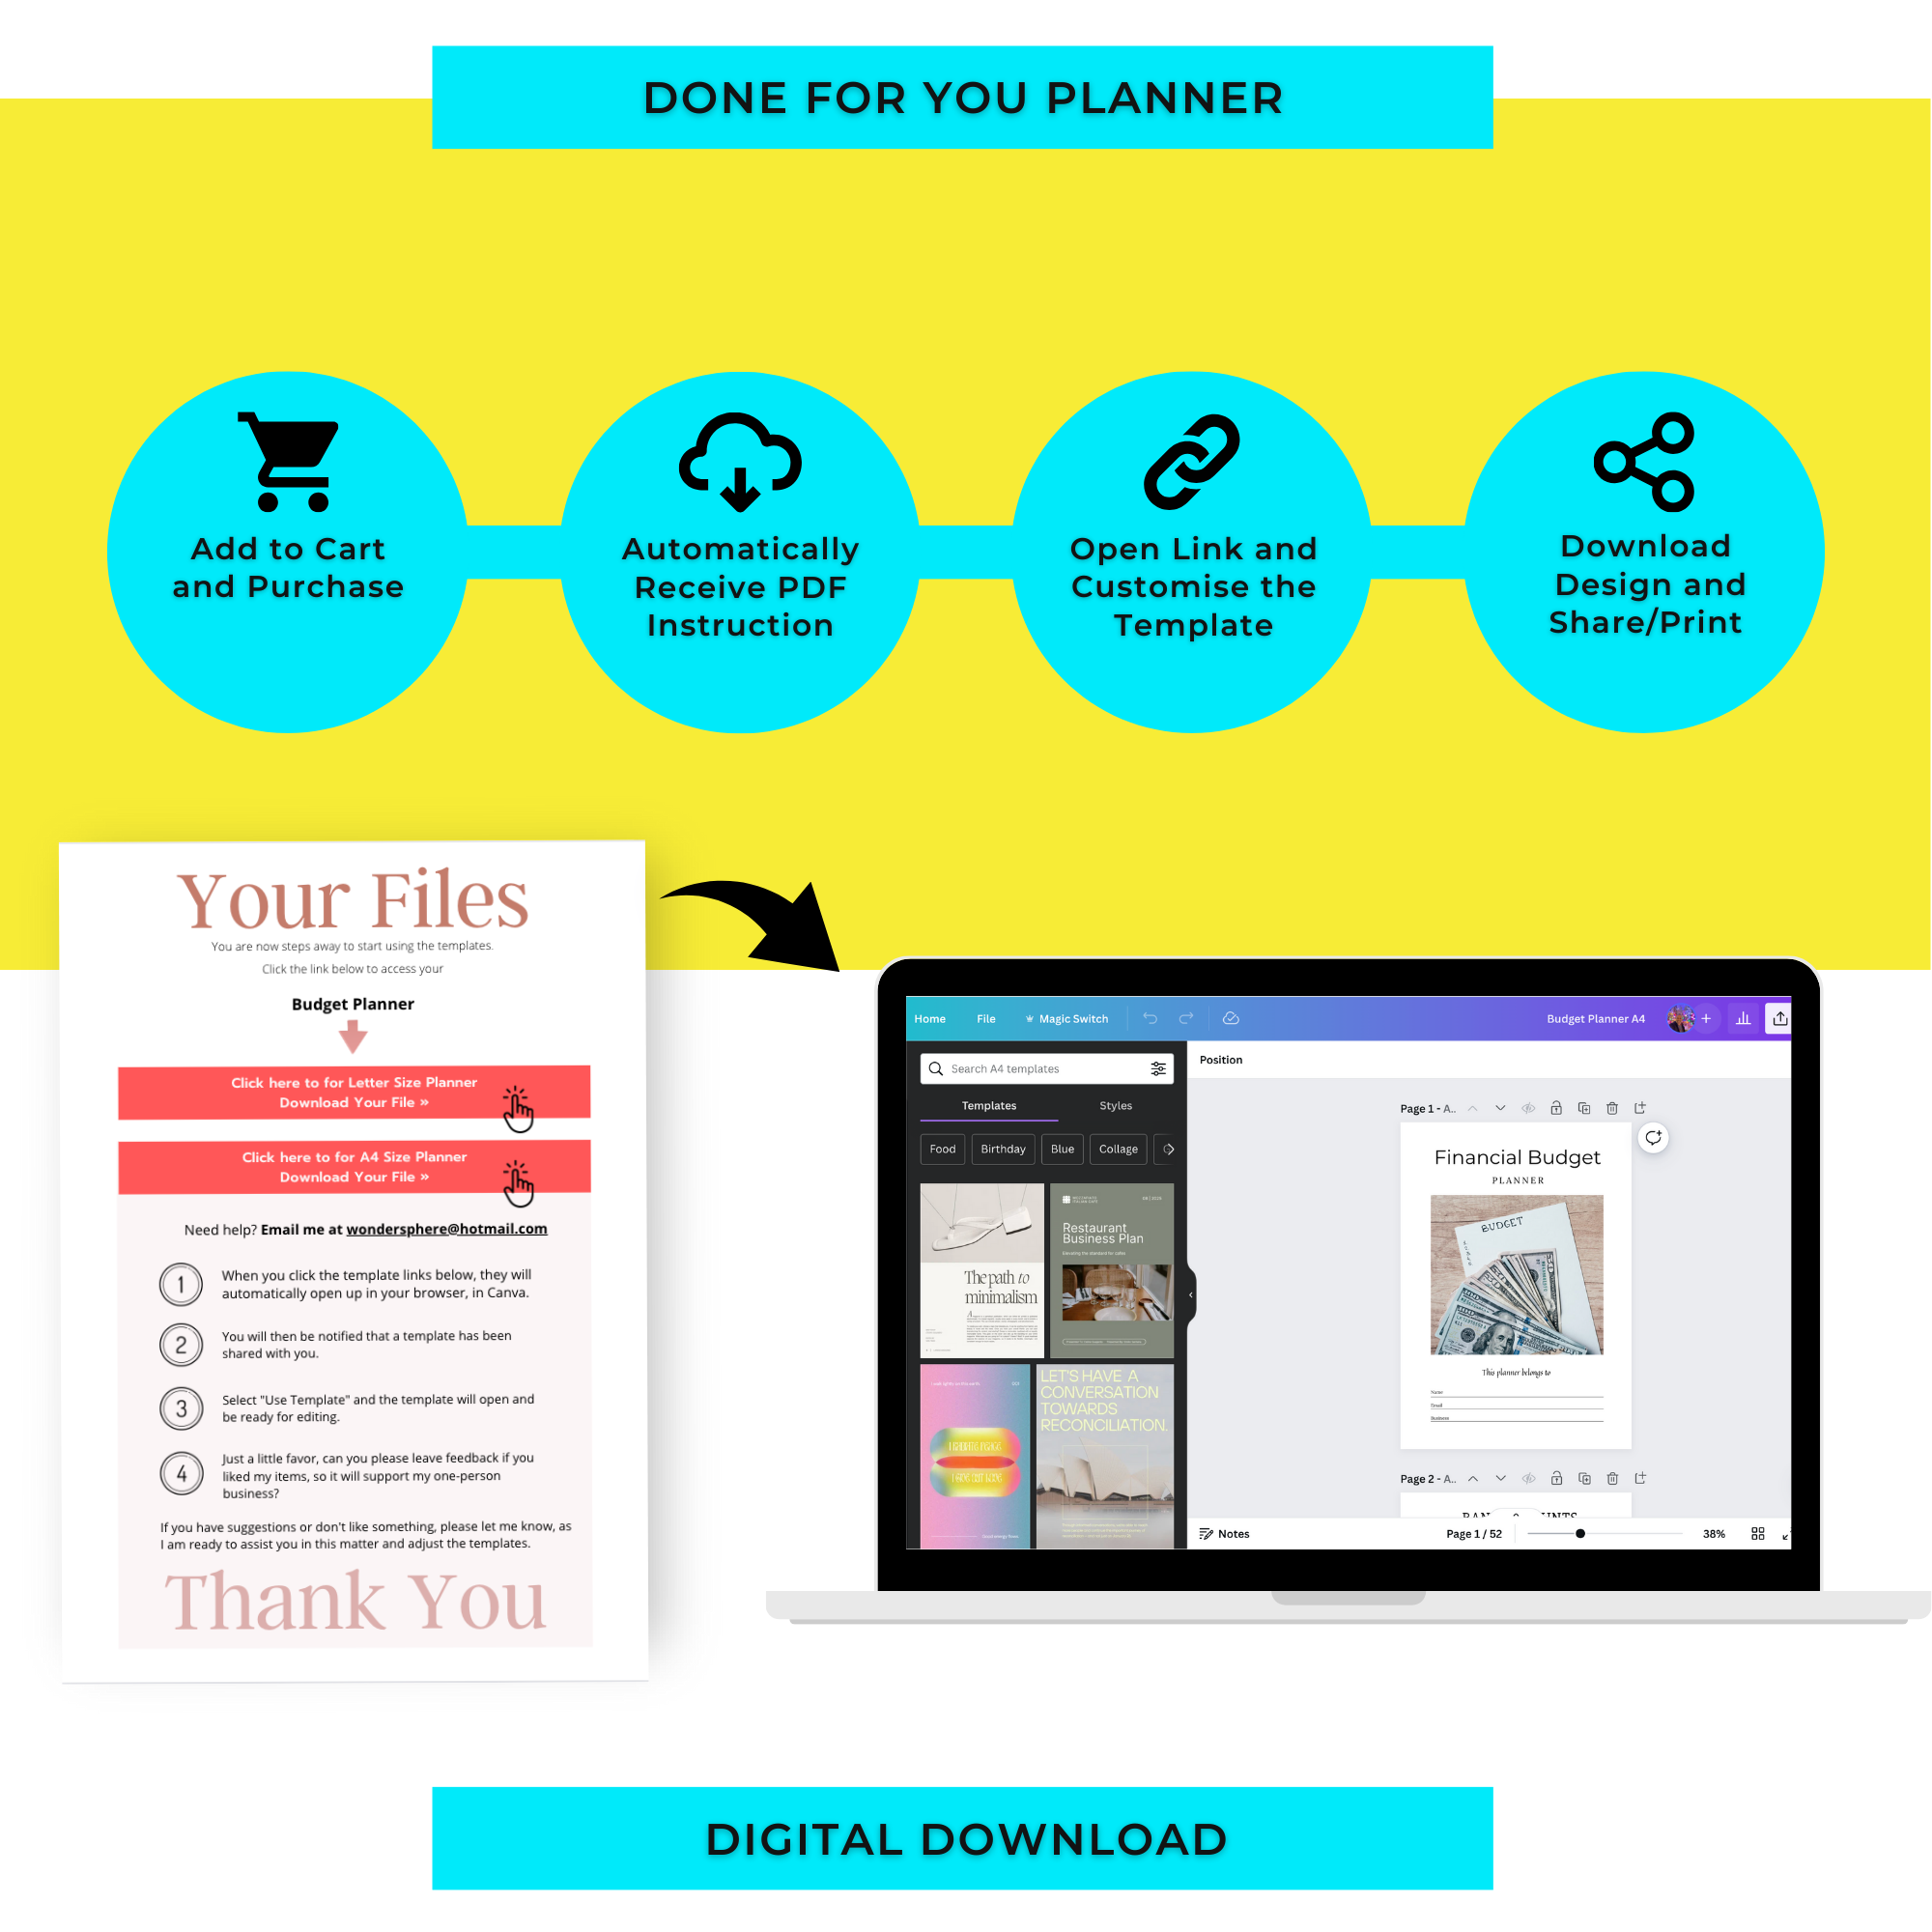 Financial Budget Planner | Done For You Planner Canva Templates PLR Digital Download | Commercial Use